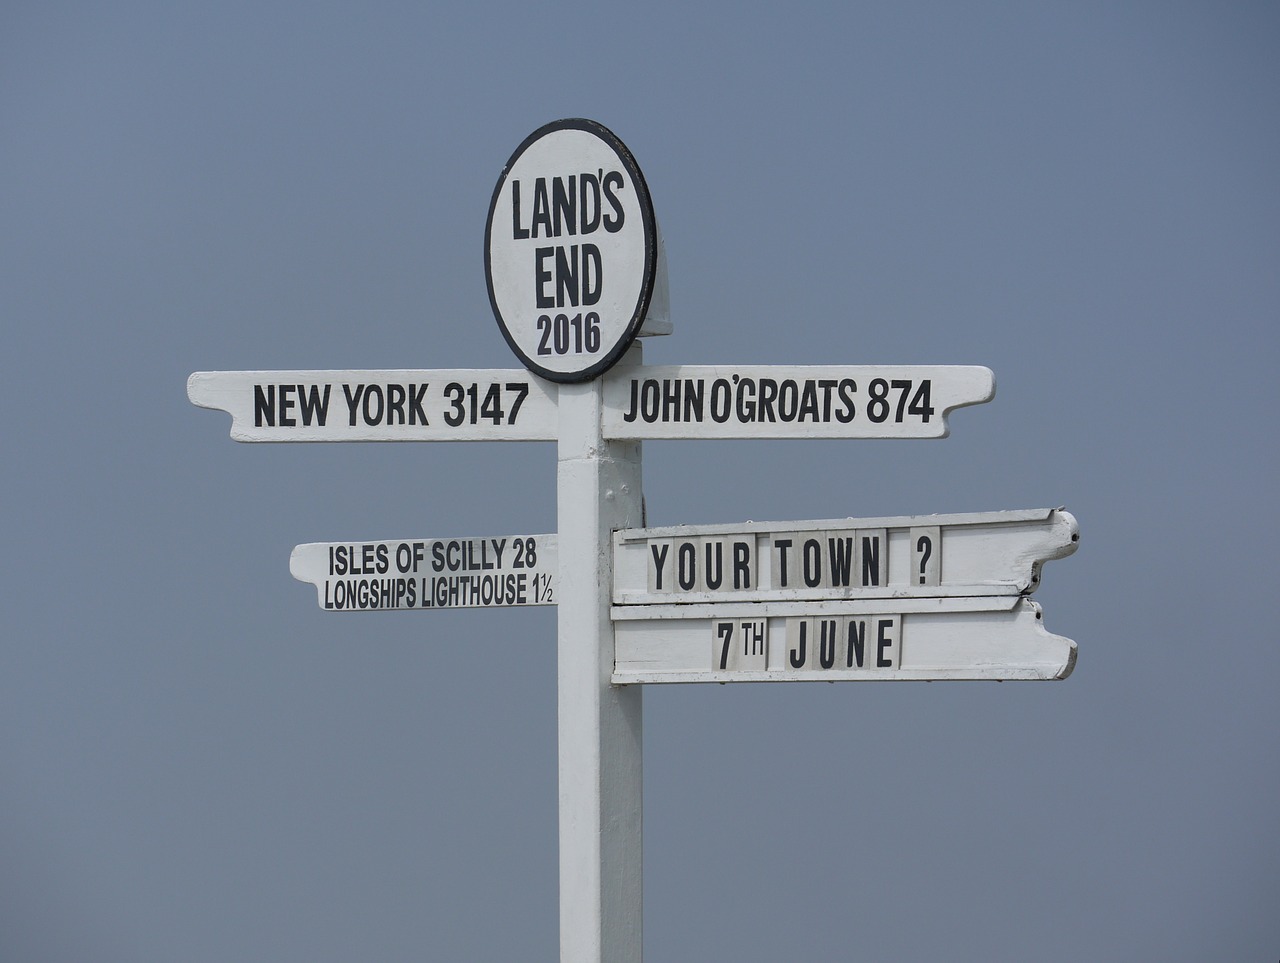 land's end directory cornwall free photo